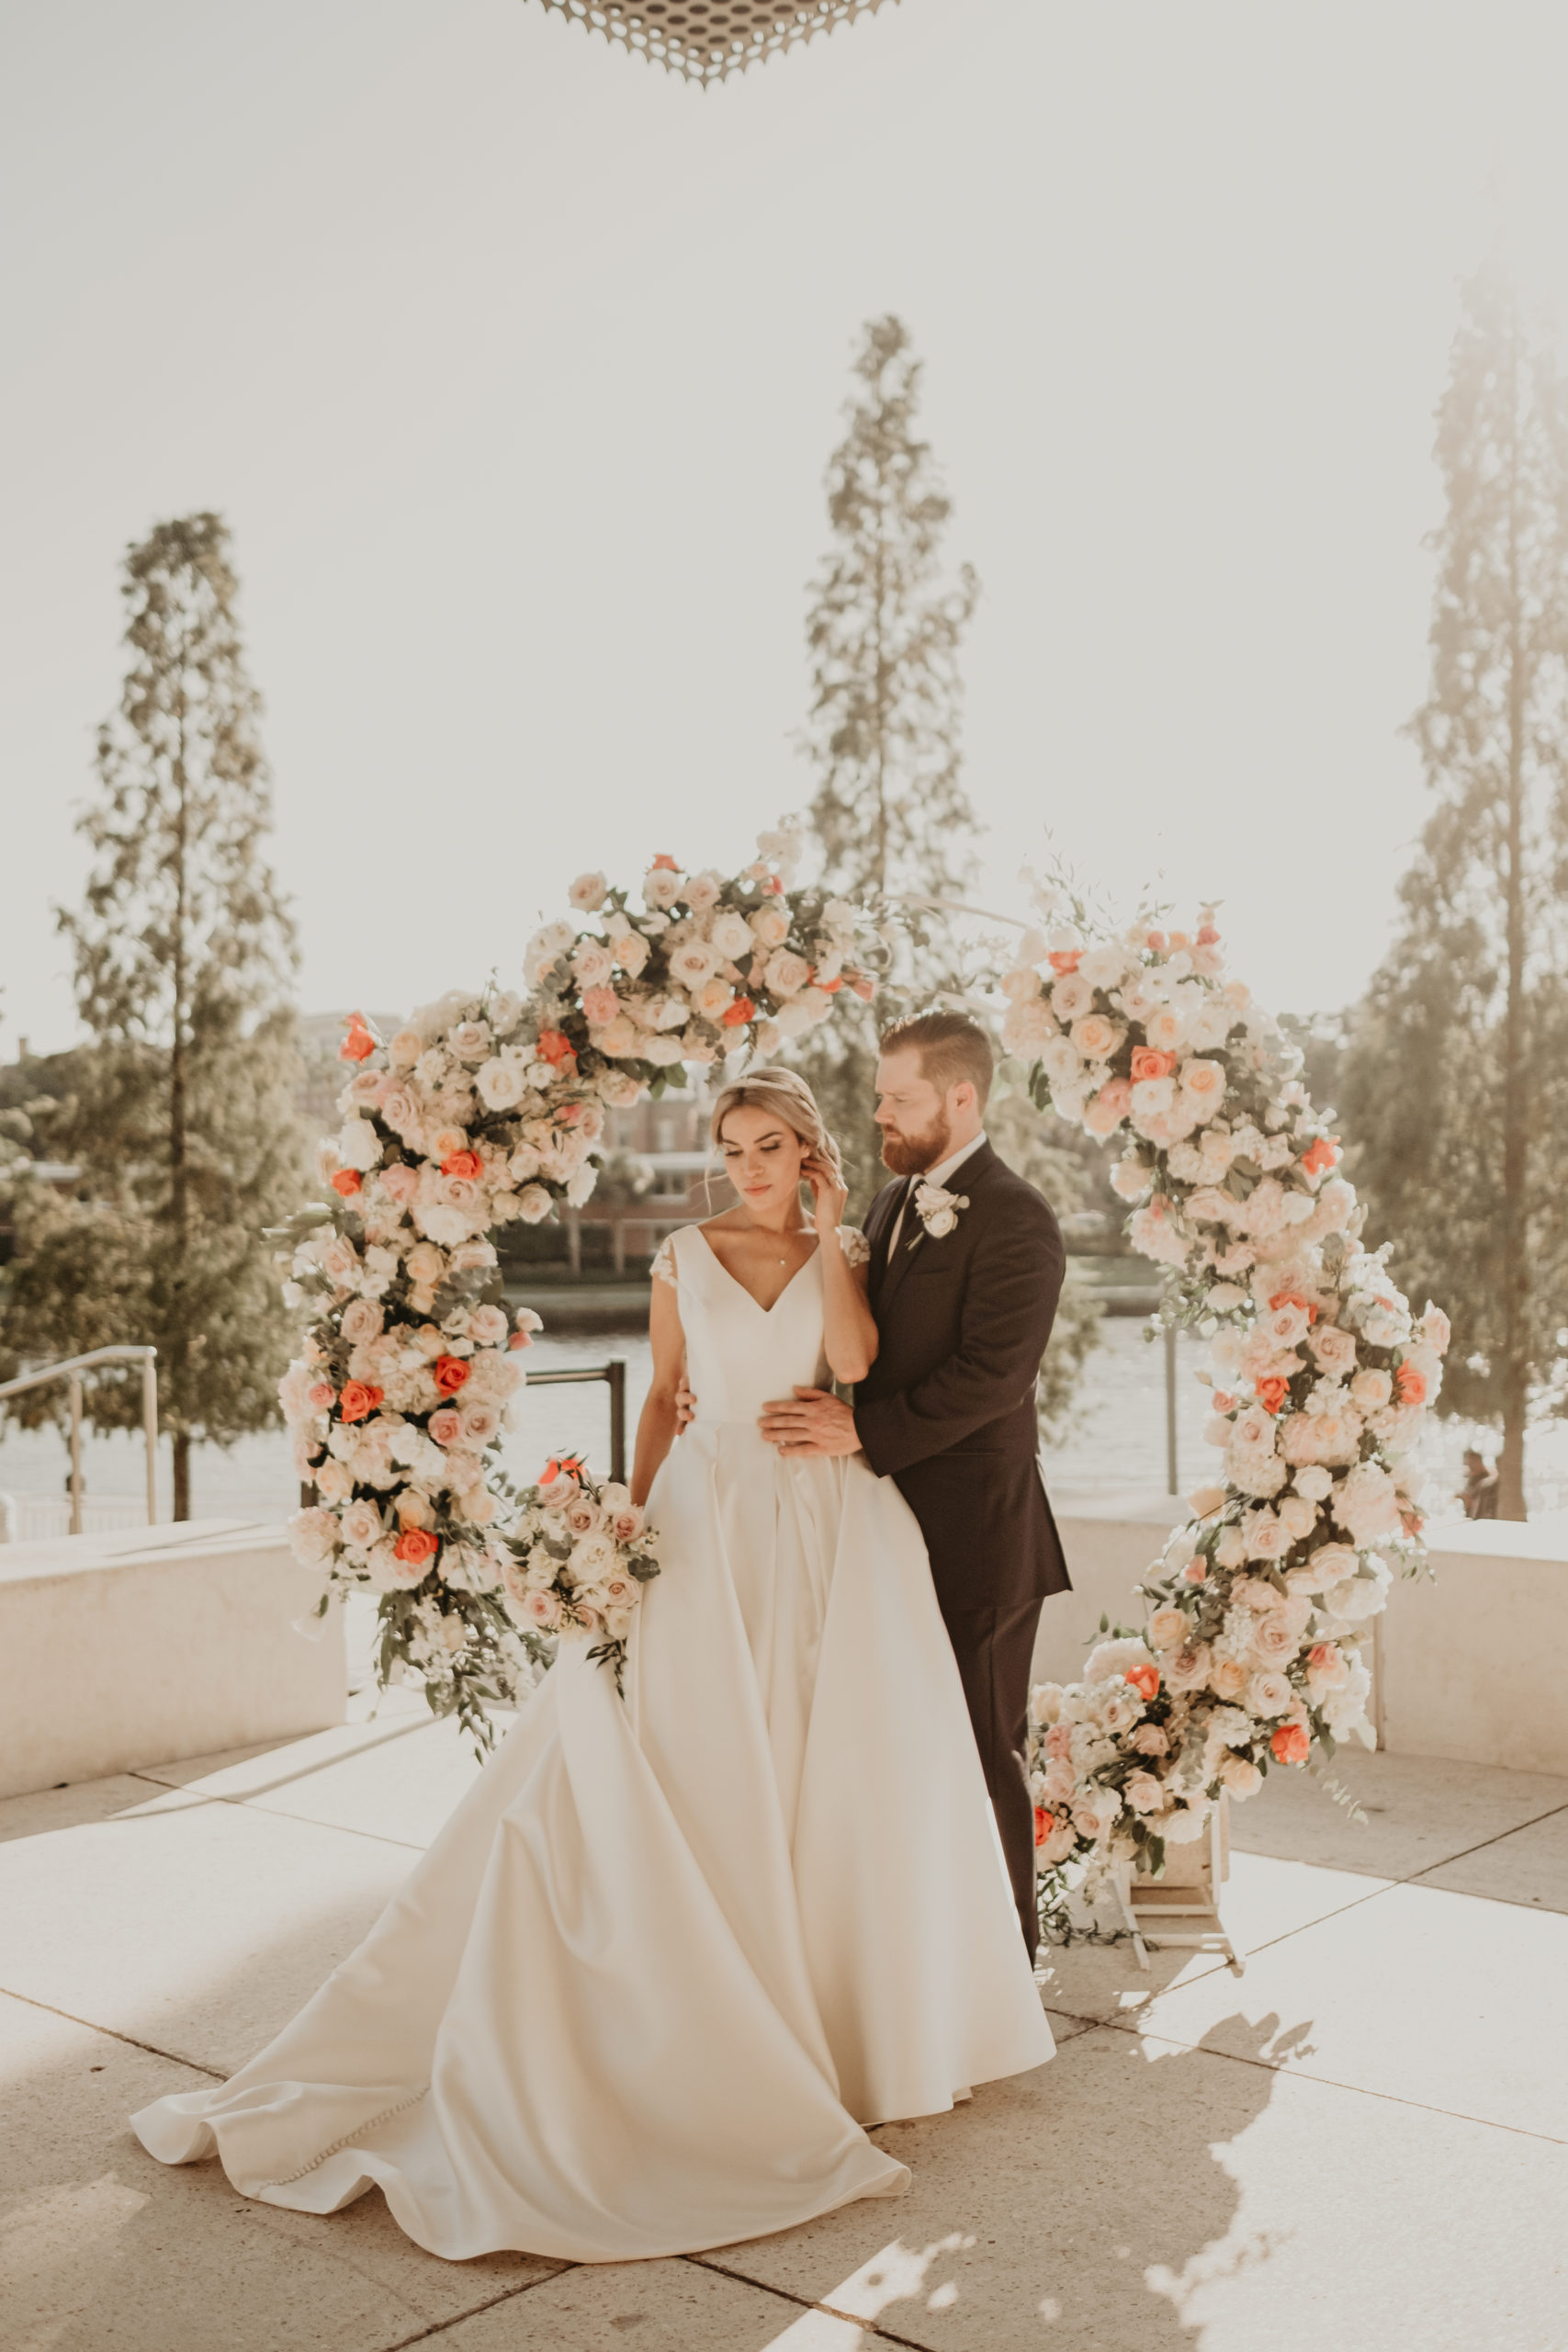 A lovely shot of the bride and groom embracing with a round floral arch adorned with pink and white flowers at The Tampa Museum of Art, wedding planned by Oh My Occasions